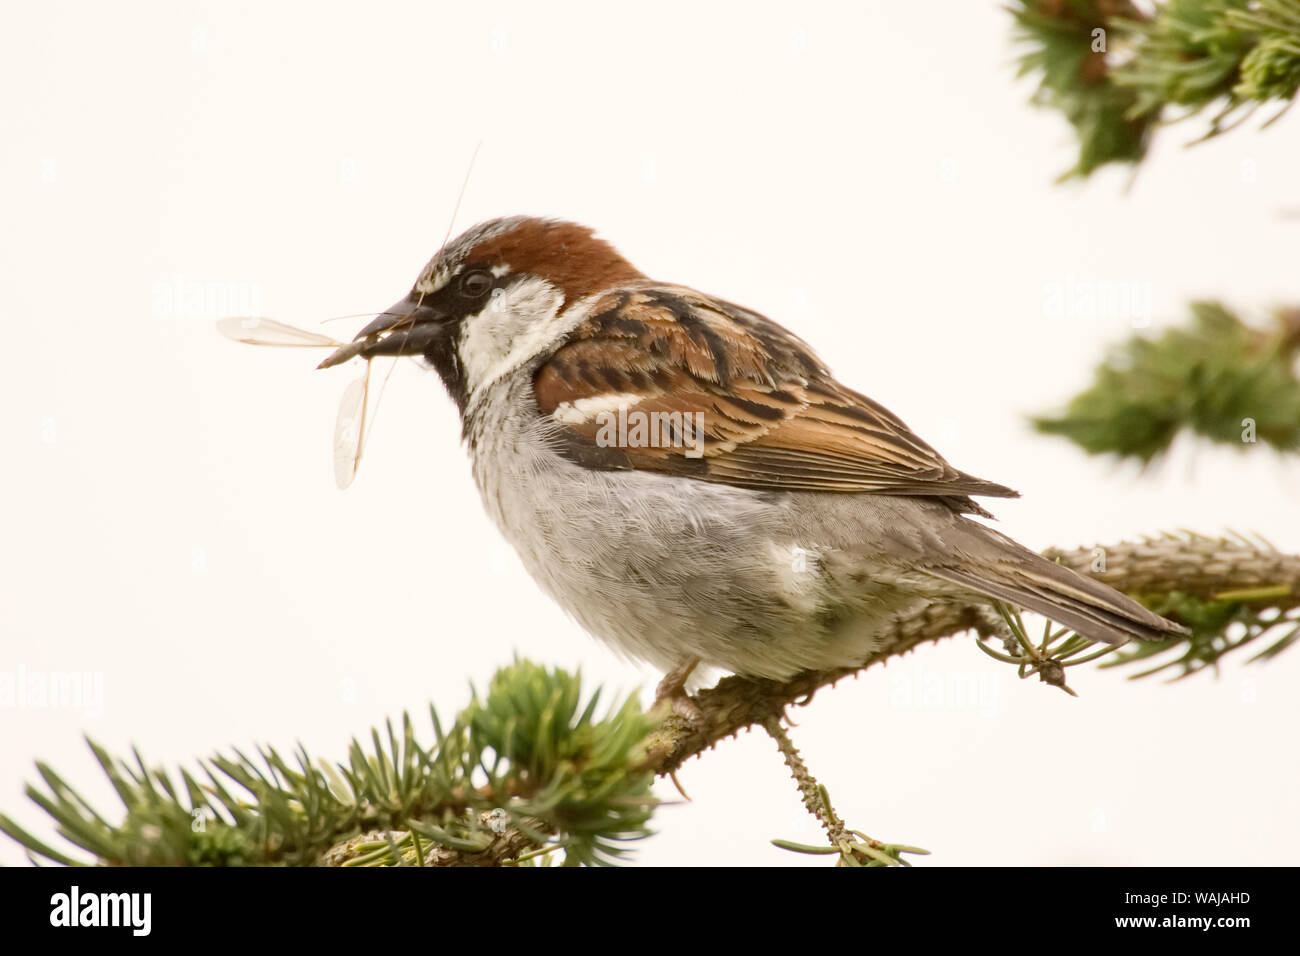 George Reifel Migratory Bird Sanctuary, British Columbia, Canada. House sparrow sitting on a branch eating an insect. Stock Photo